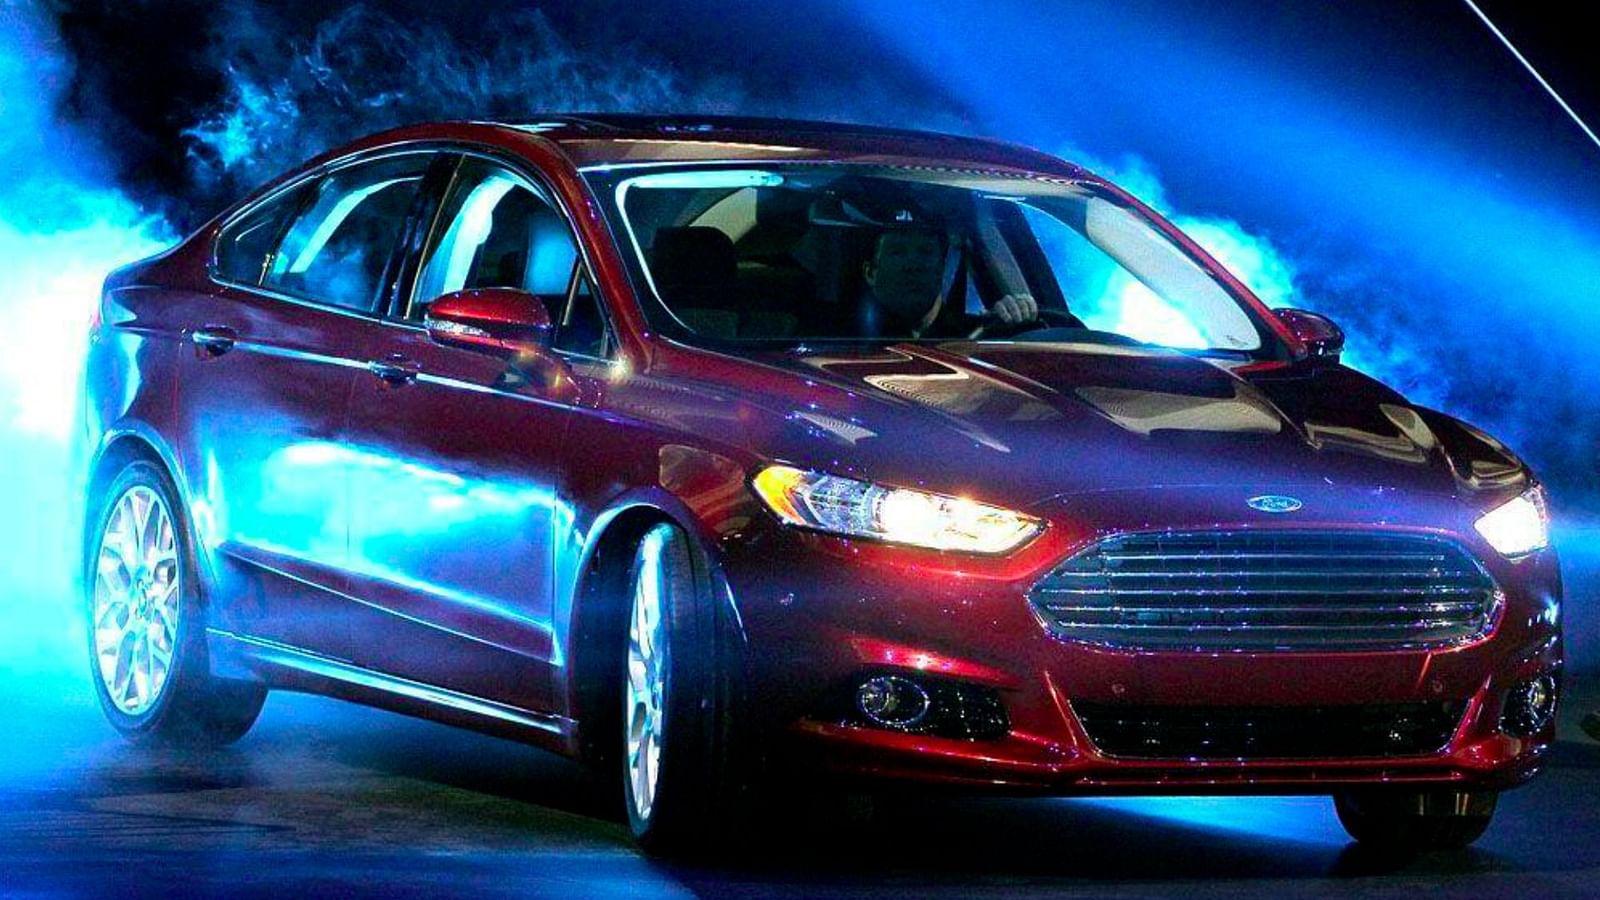 Ford Fusion recall reason, affected model years, and all you need to know